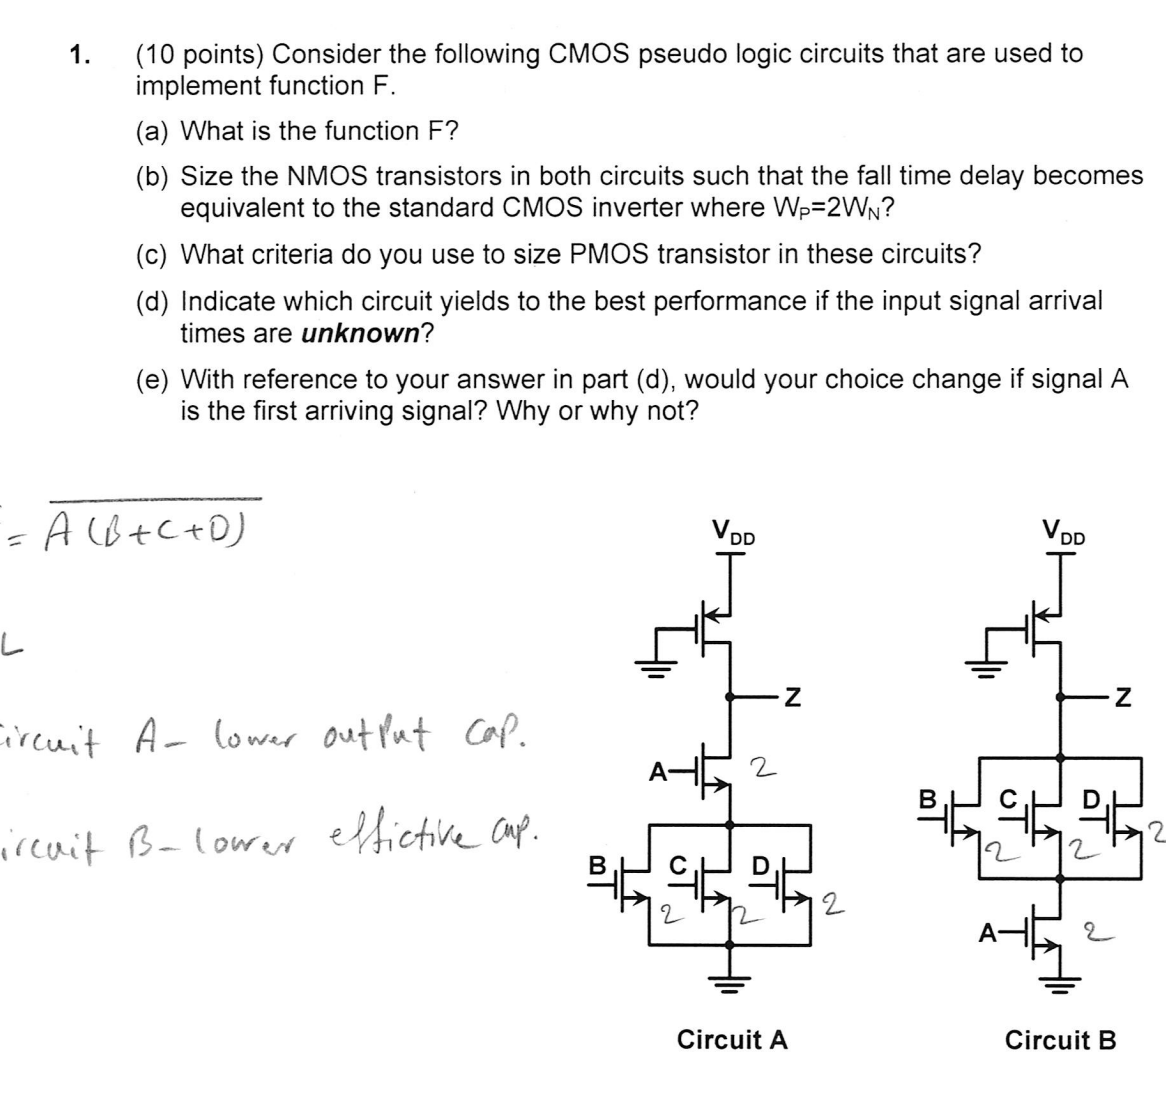 1.
(10 points) Consider the following CMOS pseudo logic circuits that are used to
implement function F.
(a) What is the function F?
(b) Size the NMOS transistors in both circuits such that the fall time delay becomes
equivalent to the standard CMOS inverter where WP=2WN?
(c) What criteria do you use to size PMOS transistor in these circuits?
(d) Indicate which circuit yields to the best performance if the input signal arrival
times are unknown?
(e) With reference to your answer in part (d), would your choice change if signal A
is the first arriving signal? Why or why not?
= A (B+C+D)
L
Circuit A- lower output cap.
ircuit B-lower effictive cup.
VDD
ان
2
N
त
Circuit A
له
VDD
N
2
서울
2
Circuit B